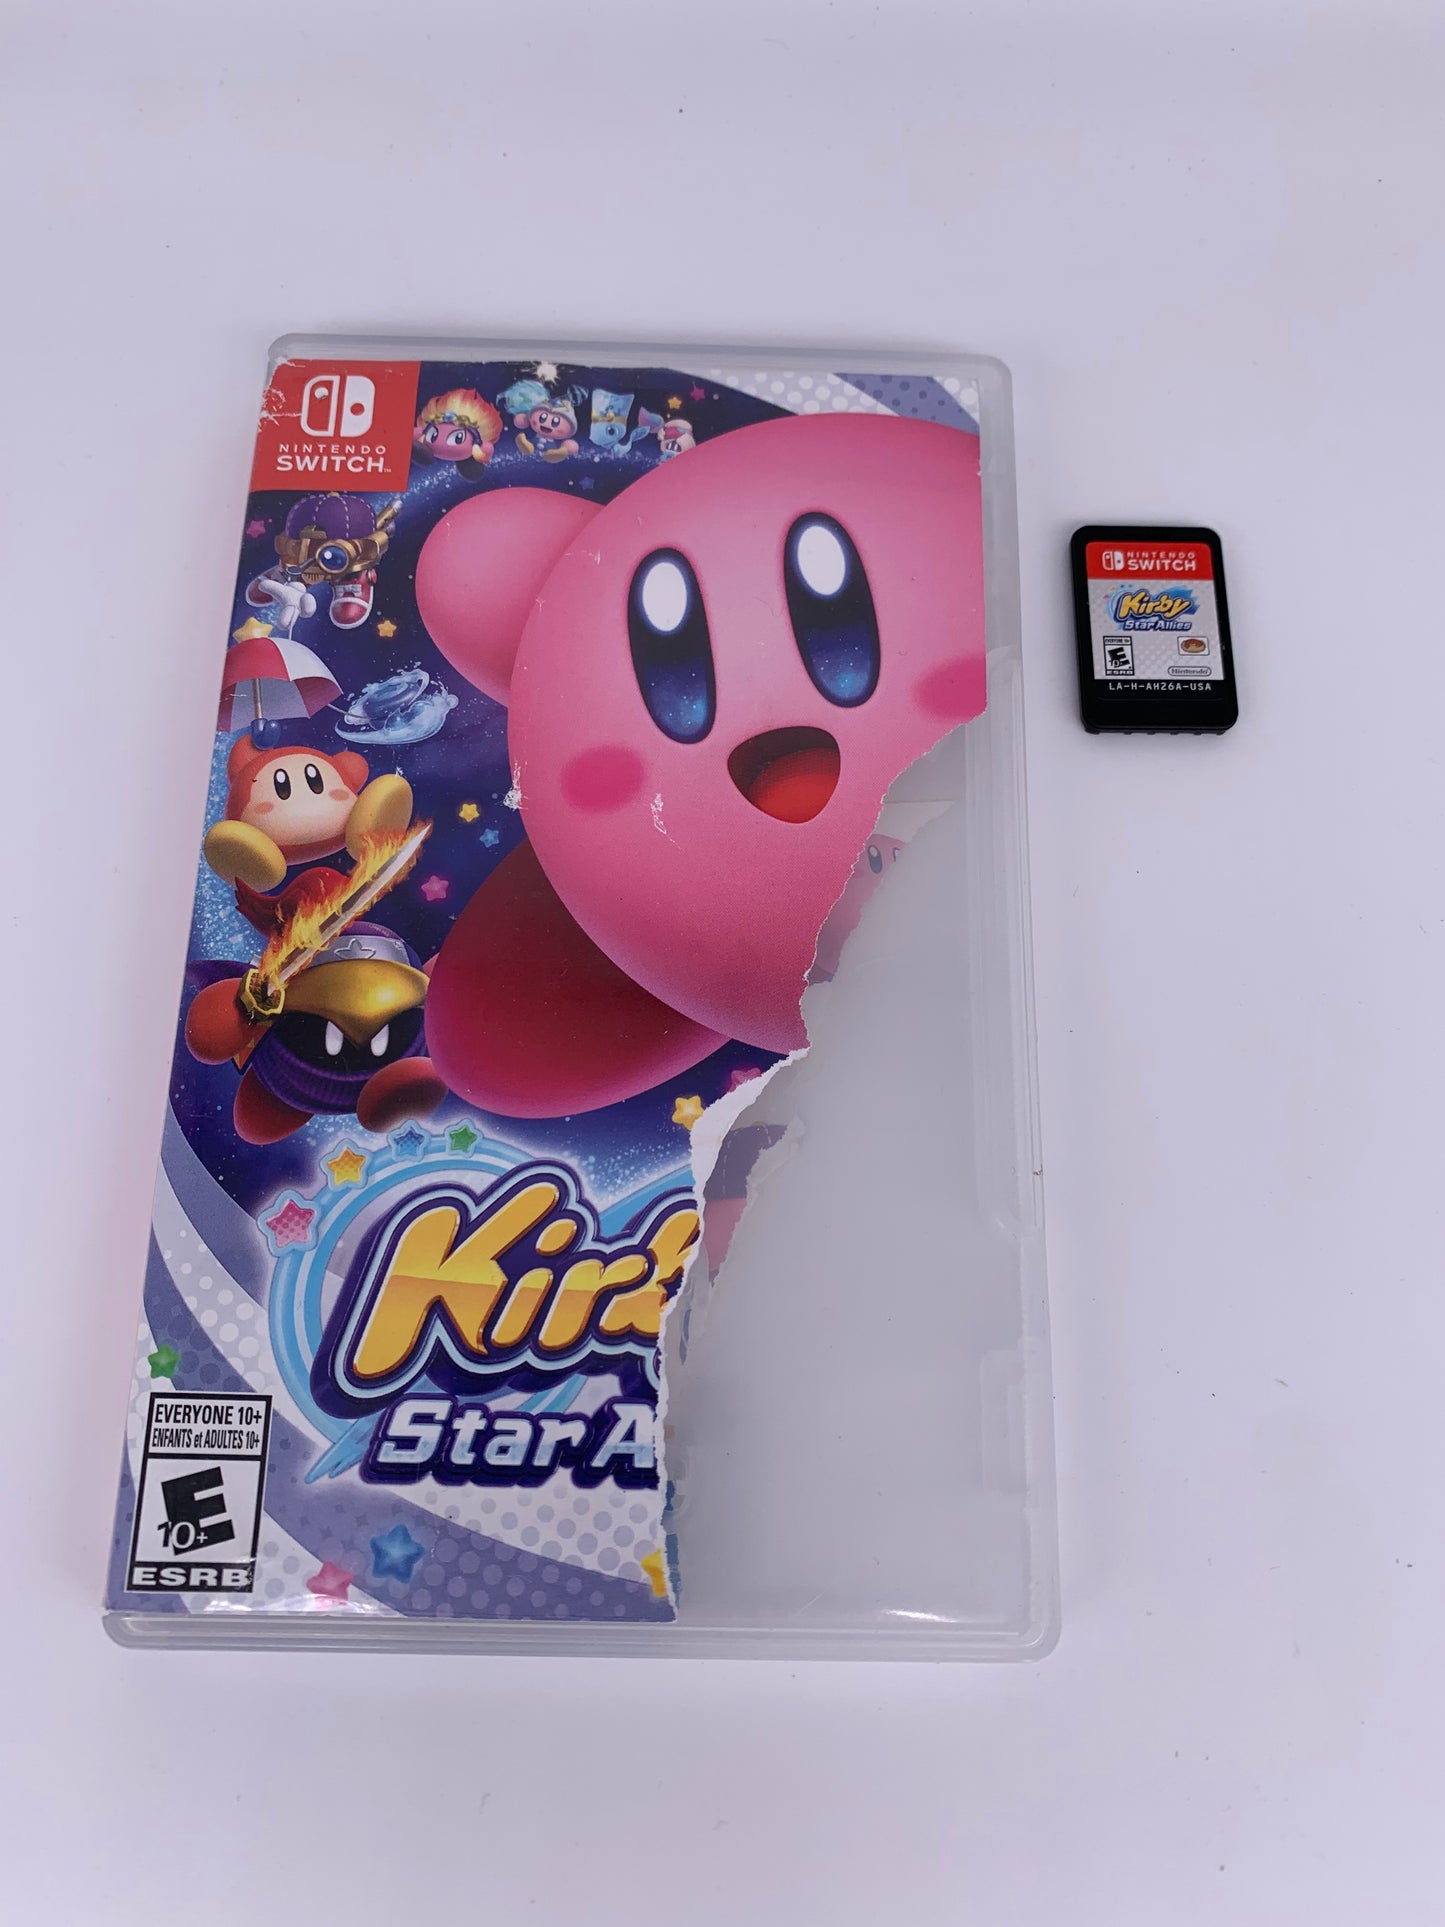 PiXEL-RETRO.COM : NINTENDO SWITCH NEW SEALED IN BOX COMPLETE MANUAL GAME NTSC KIRBY STAR ALLIES